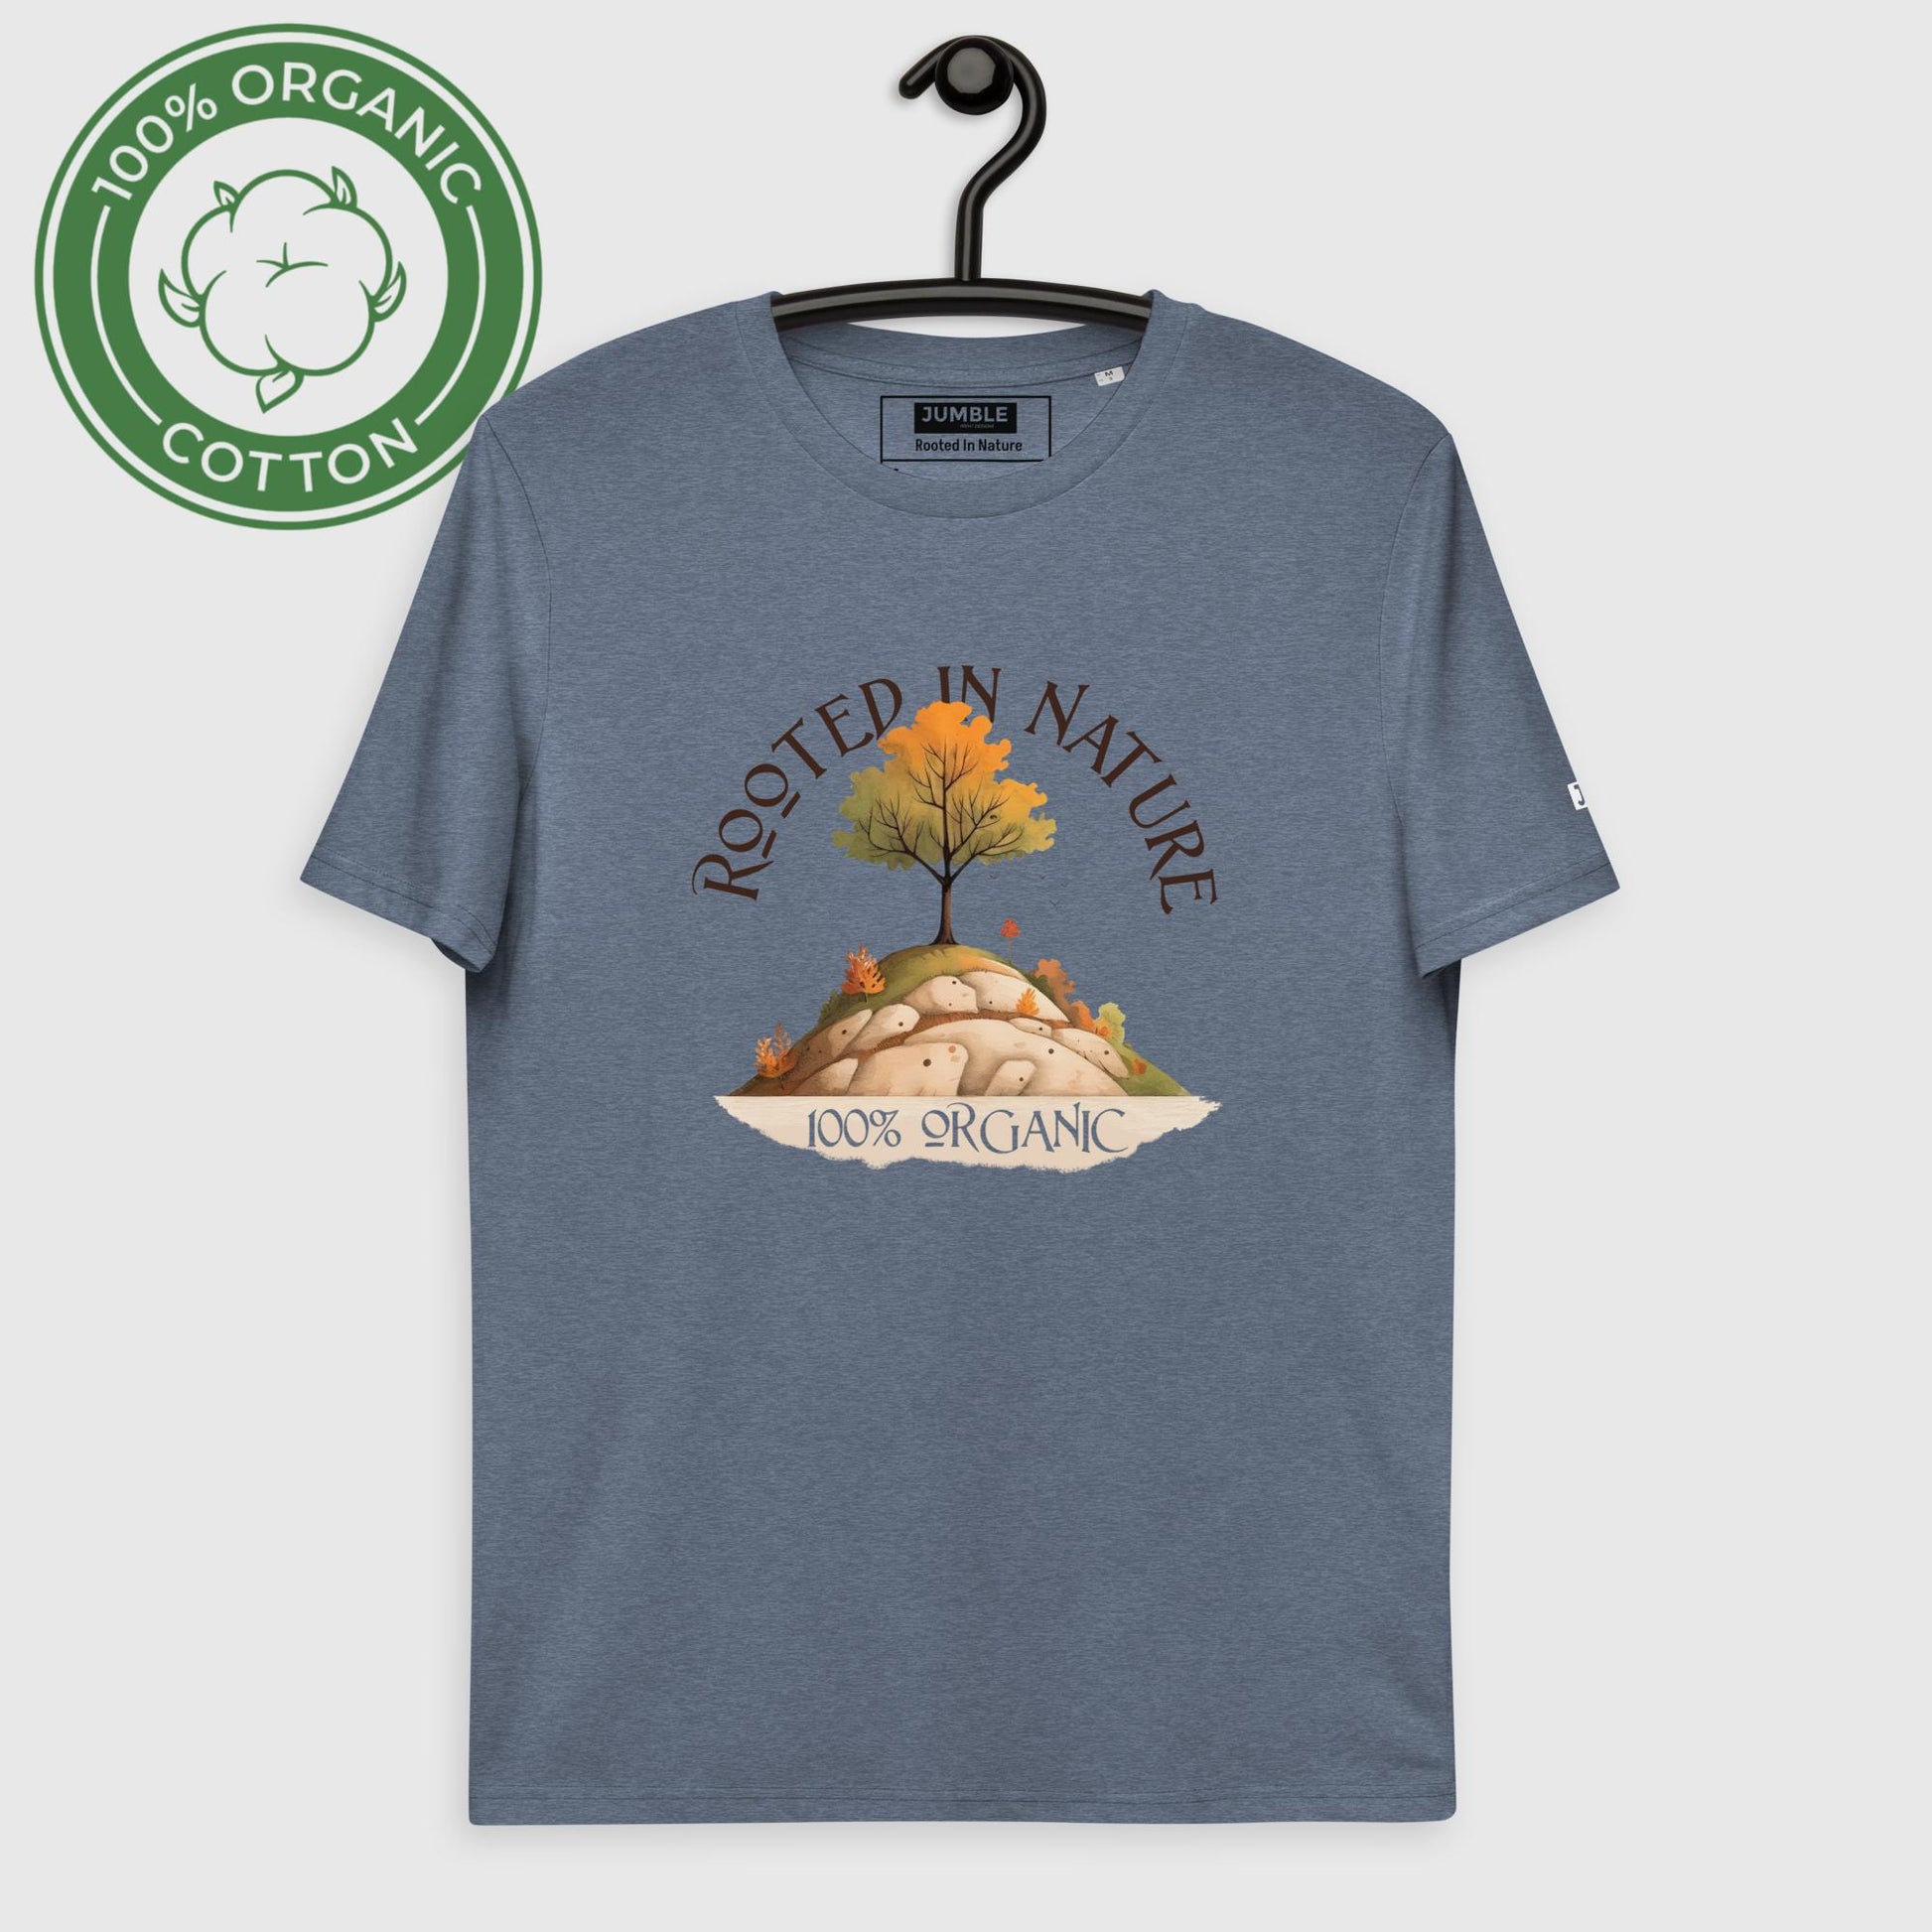 Rooted in Nature Unisex organic cotton t-shirt- in dark heather blue-on hanger